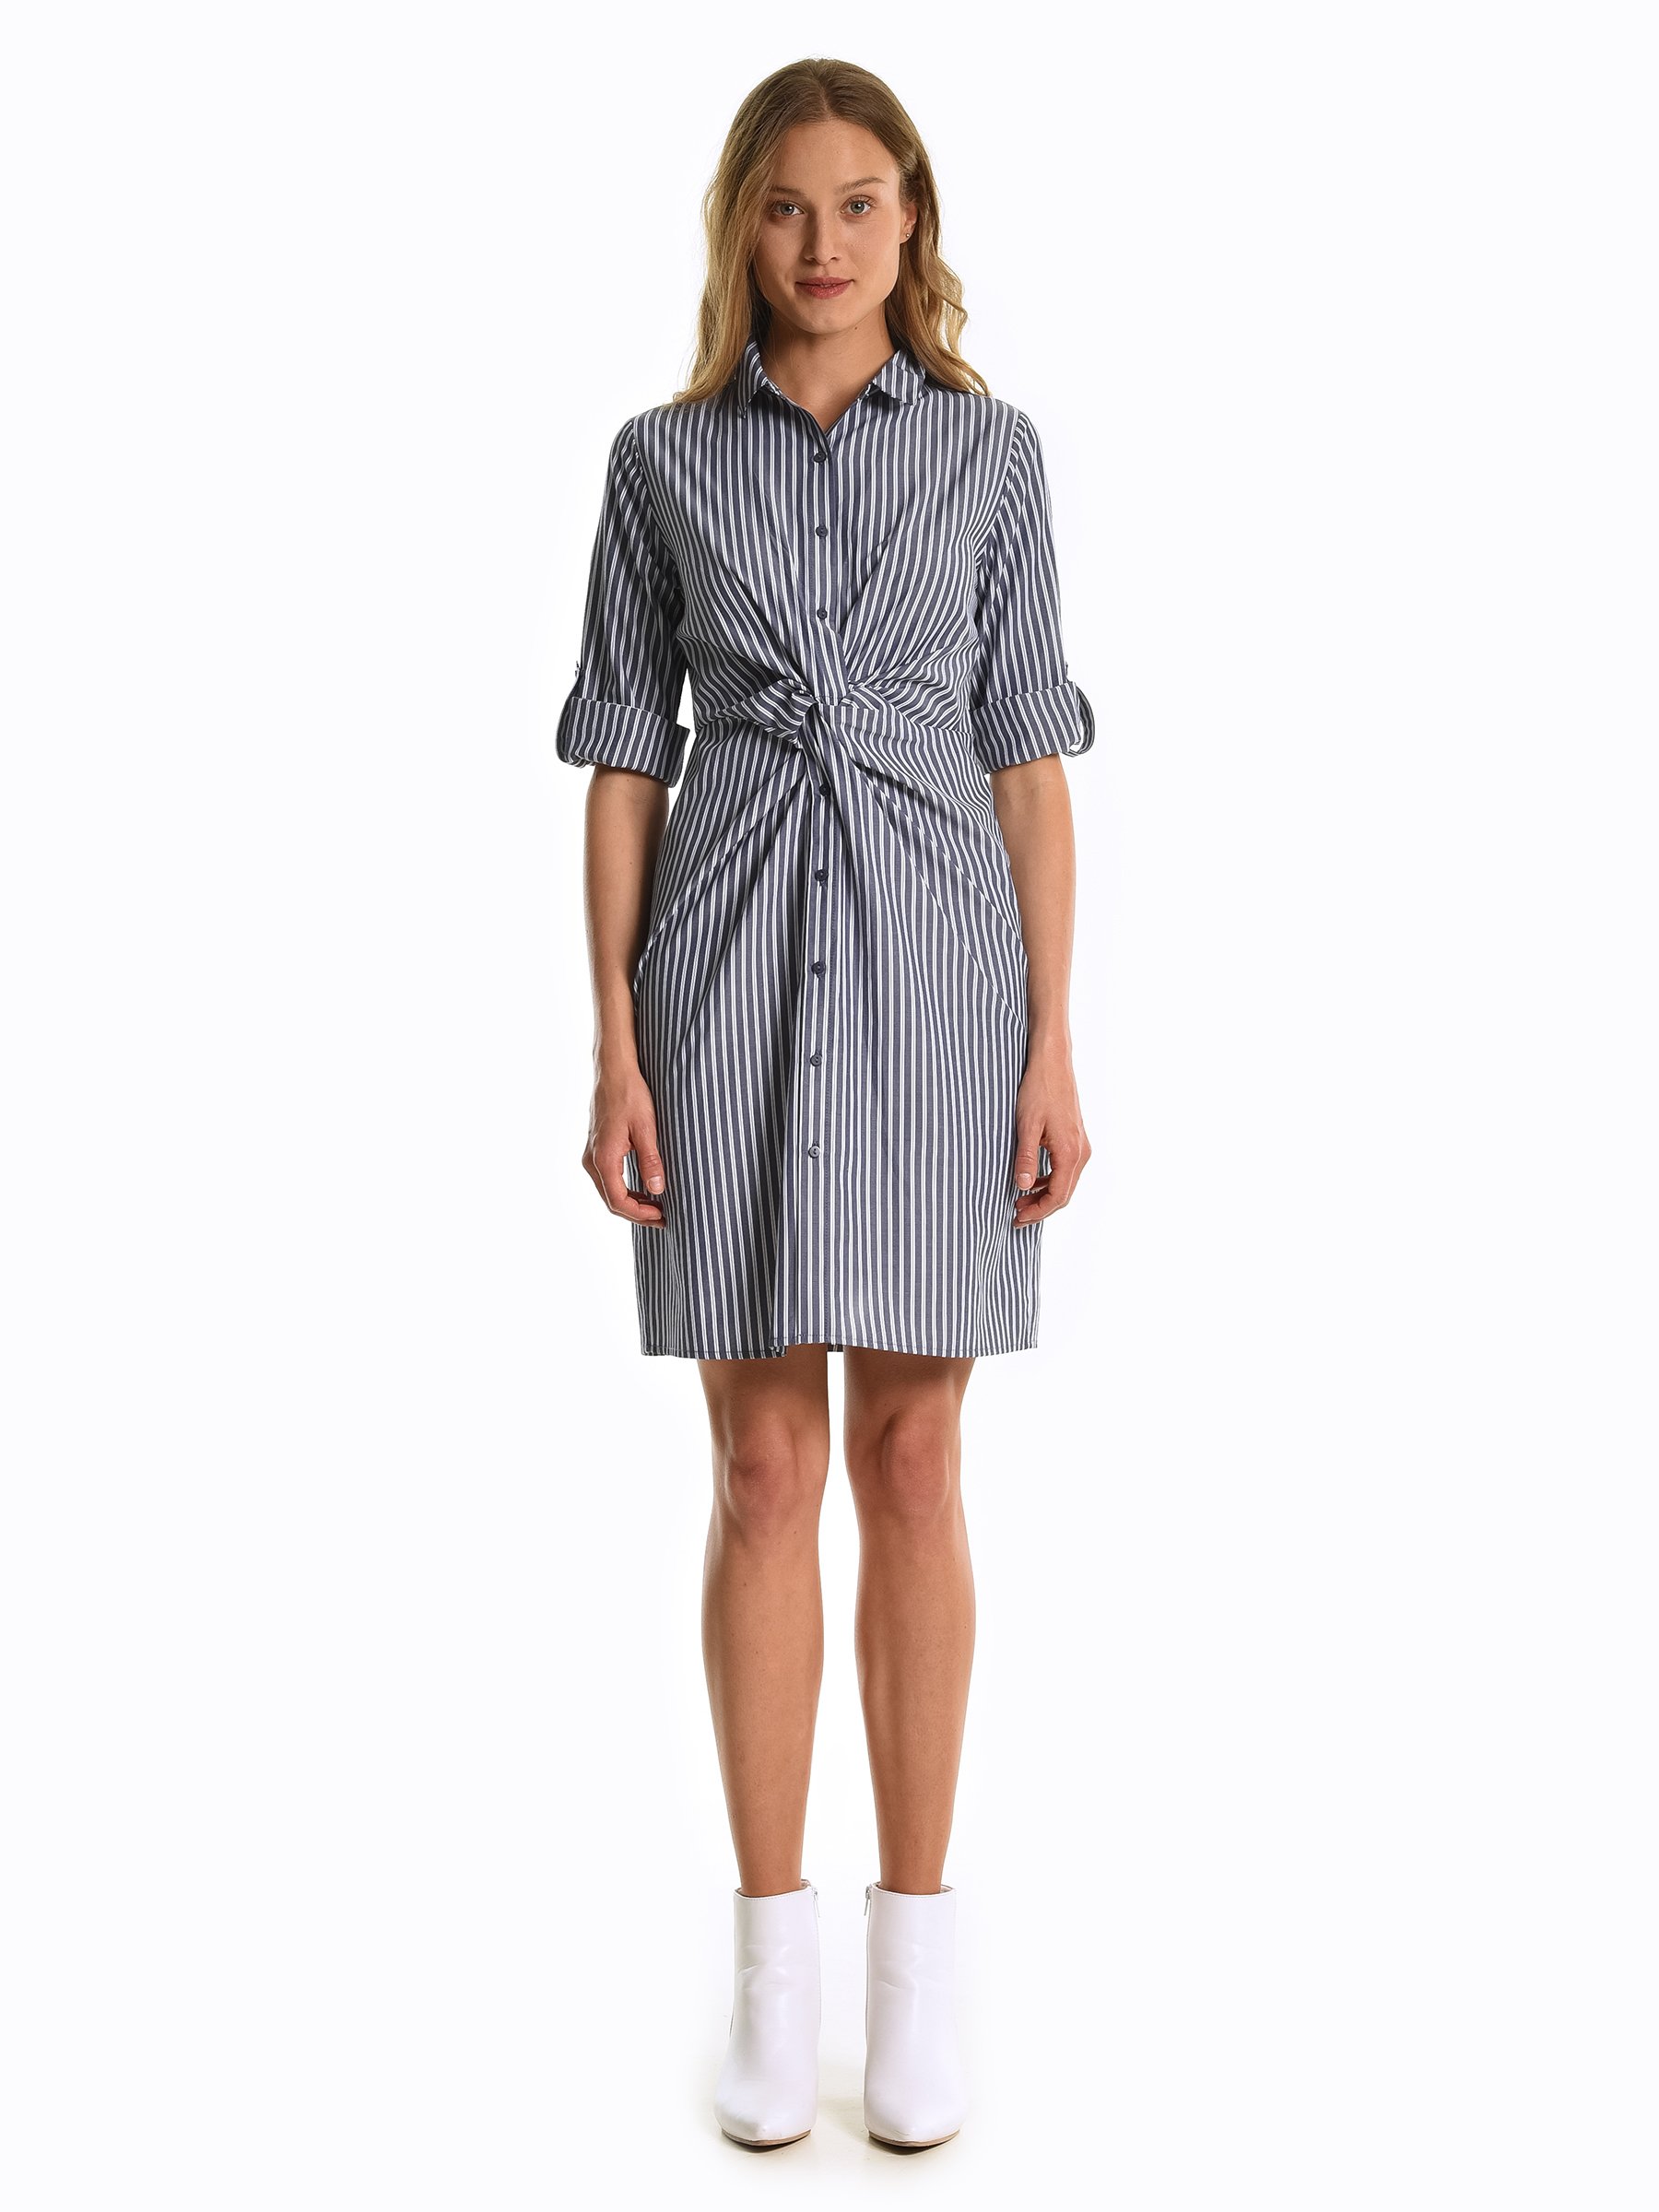 knotted shirt over dress